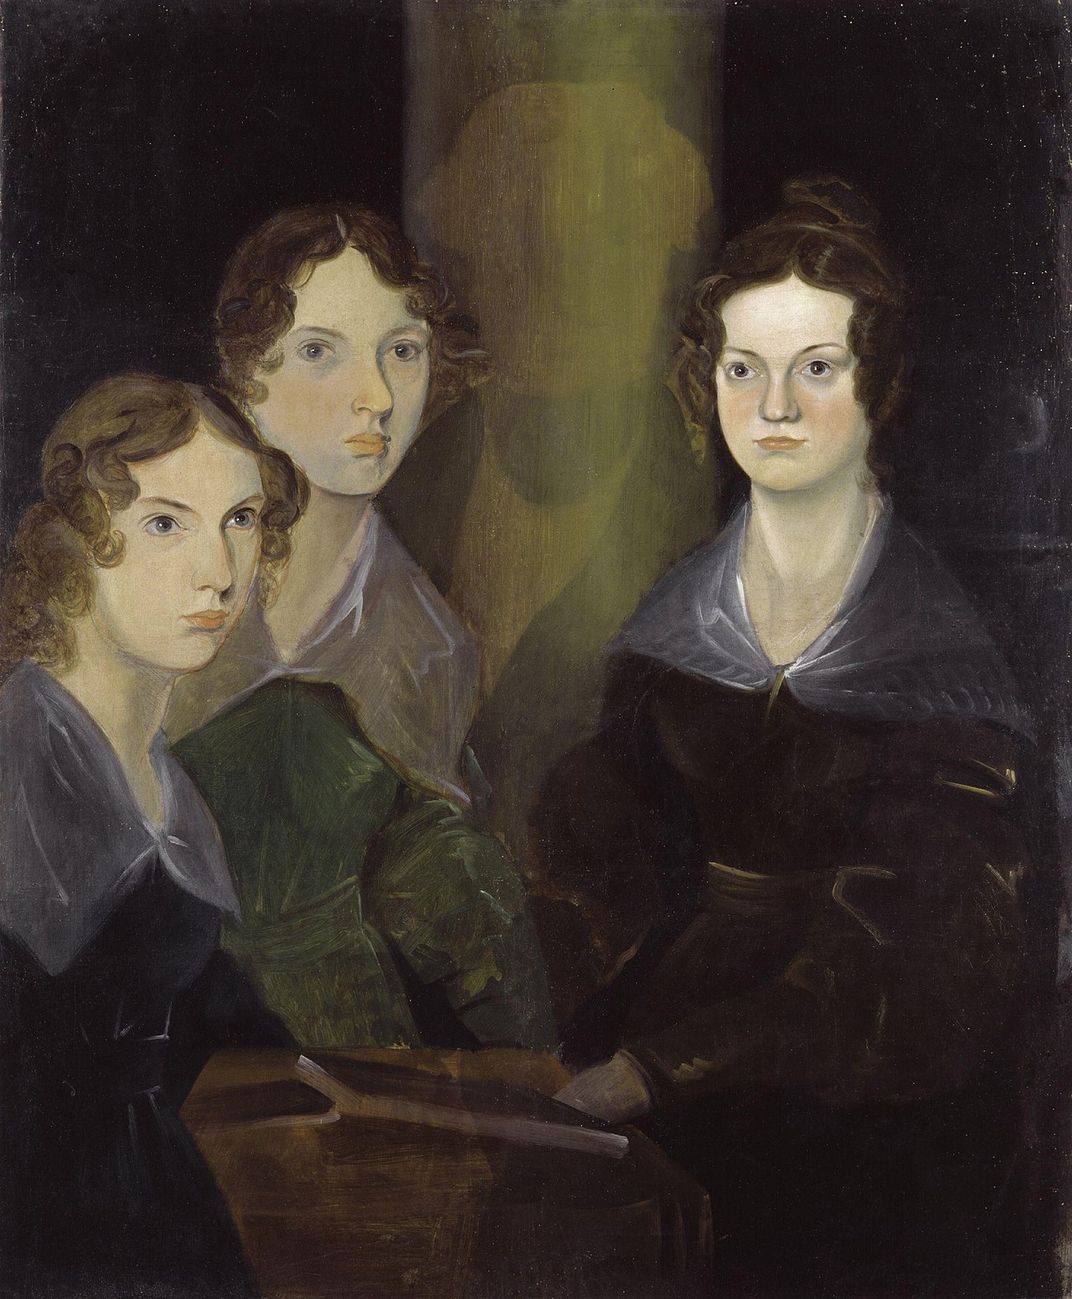 Branwell Brontë painted this portrait of his sisters—Anne, Emily and Charlotte (L to R)—in 1834